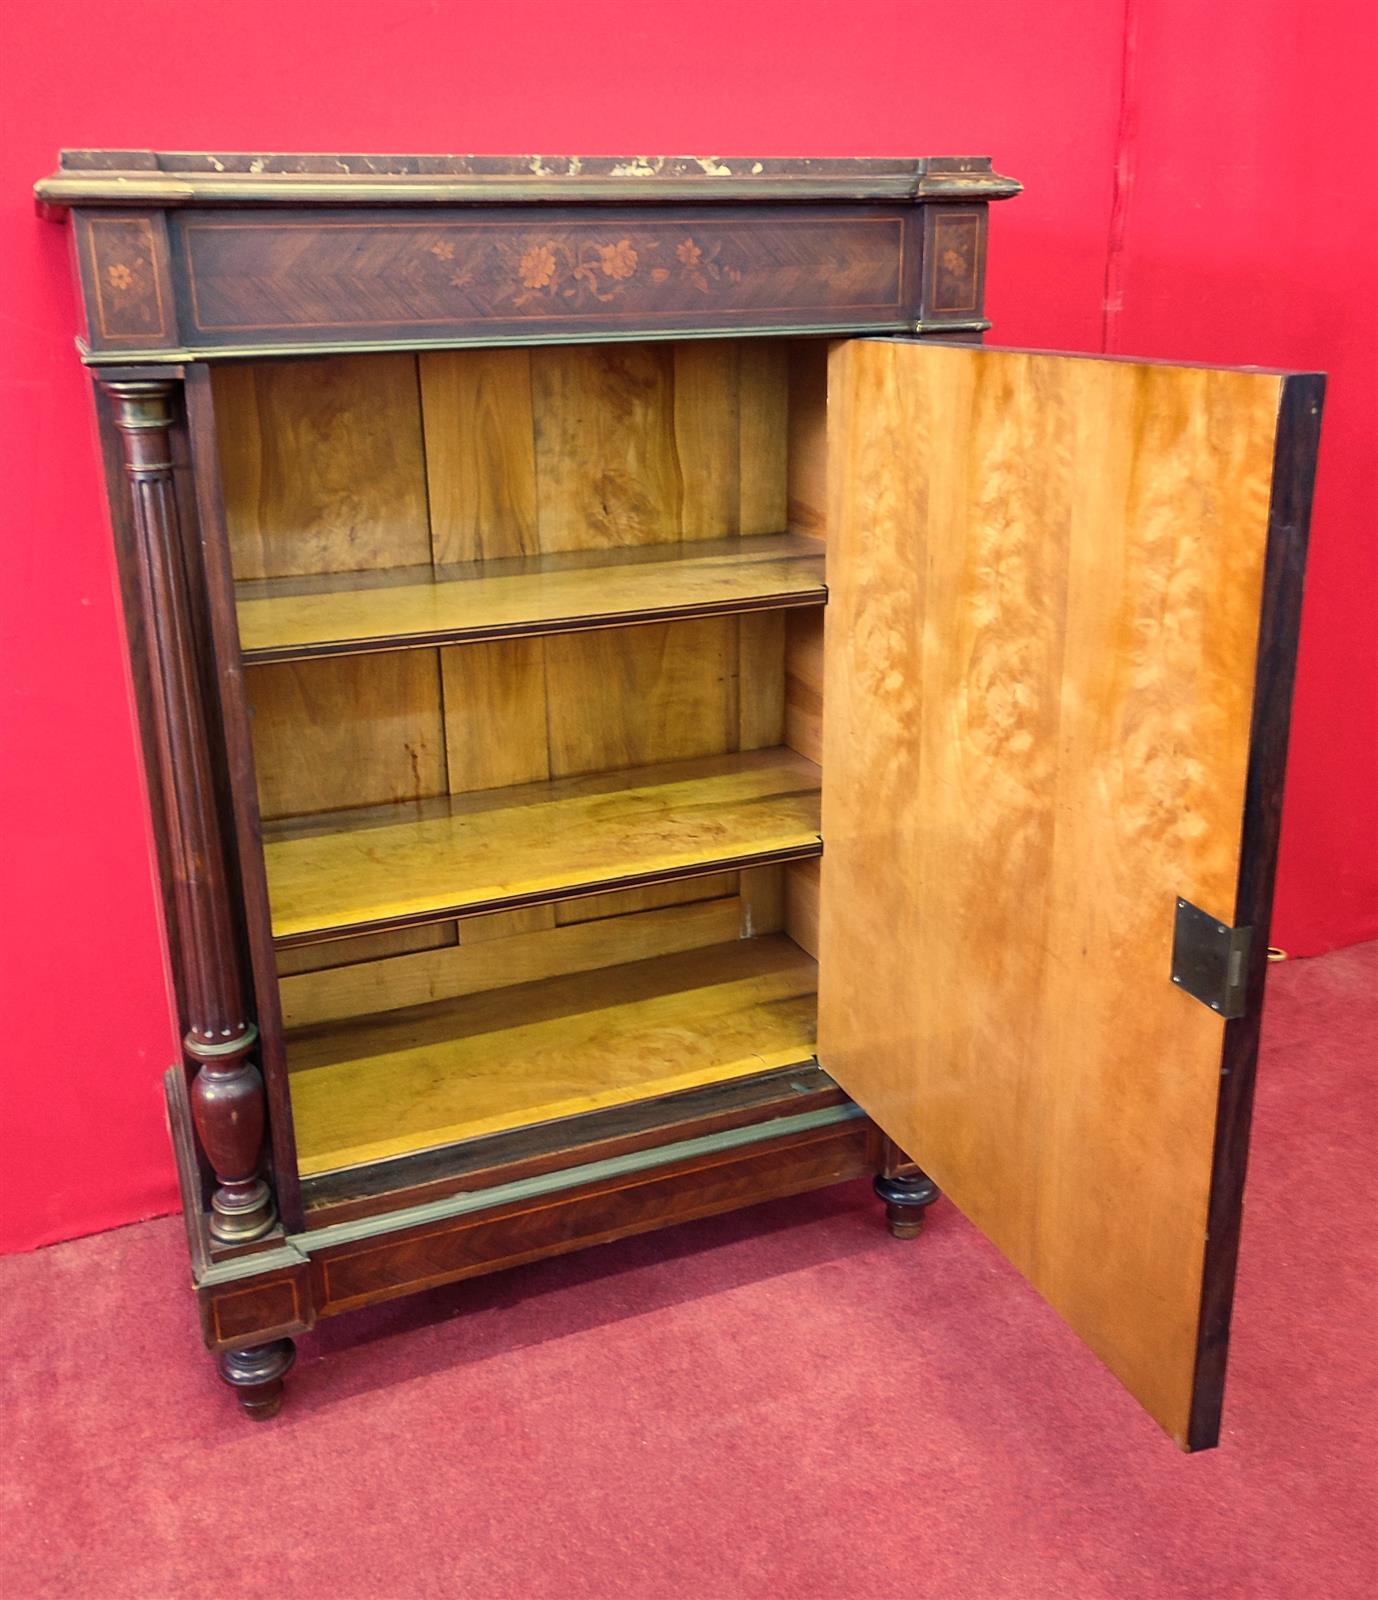 Small inlaid sideboard